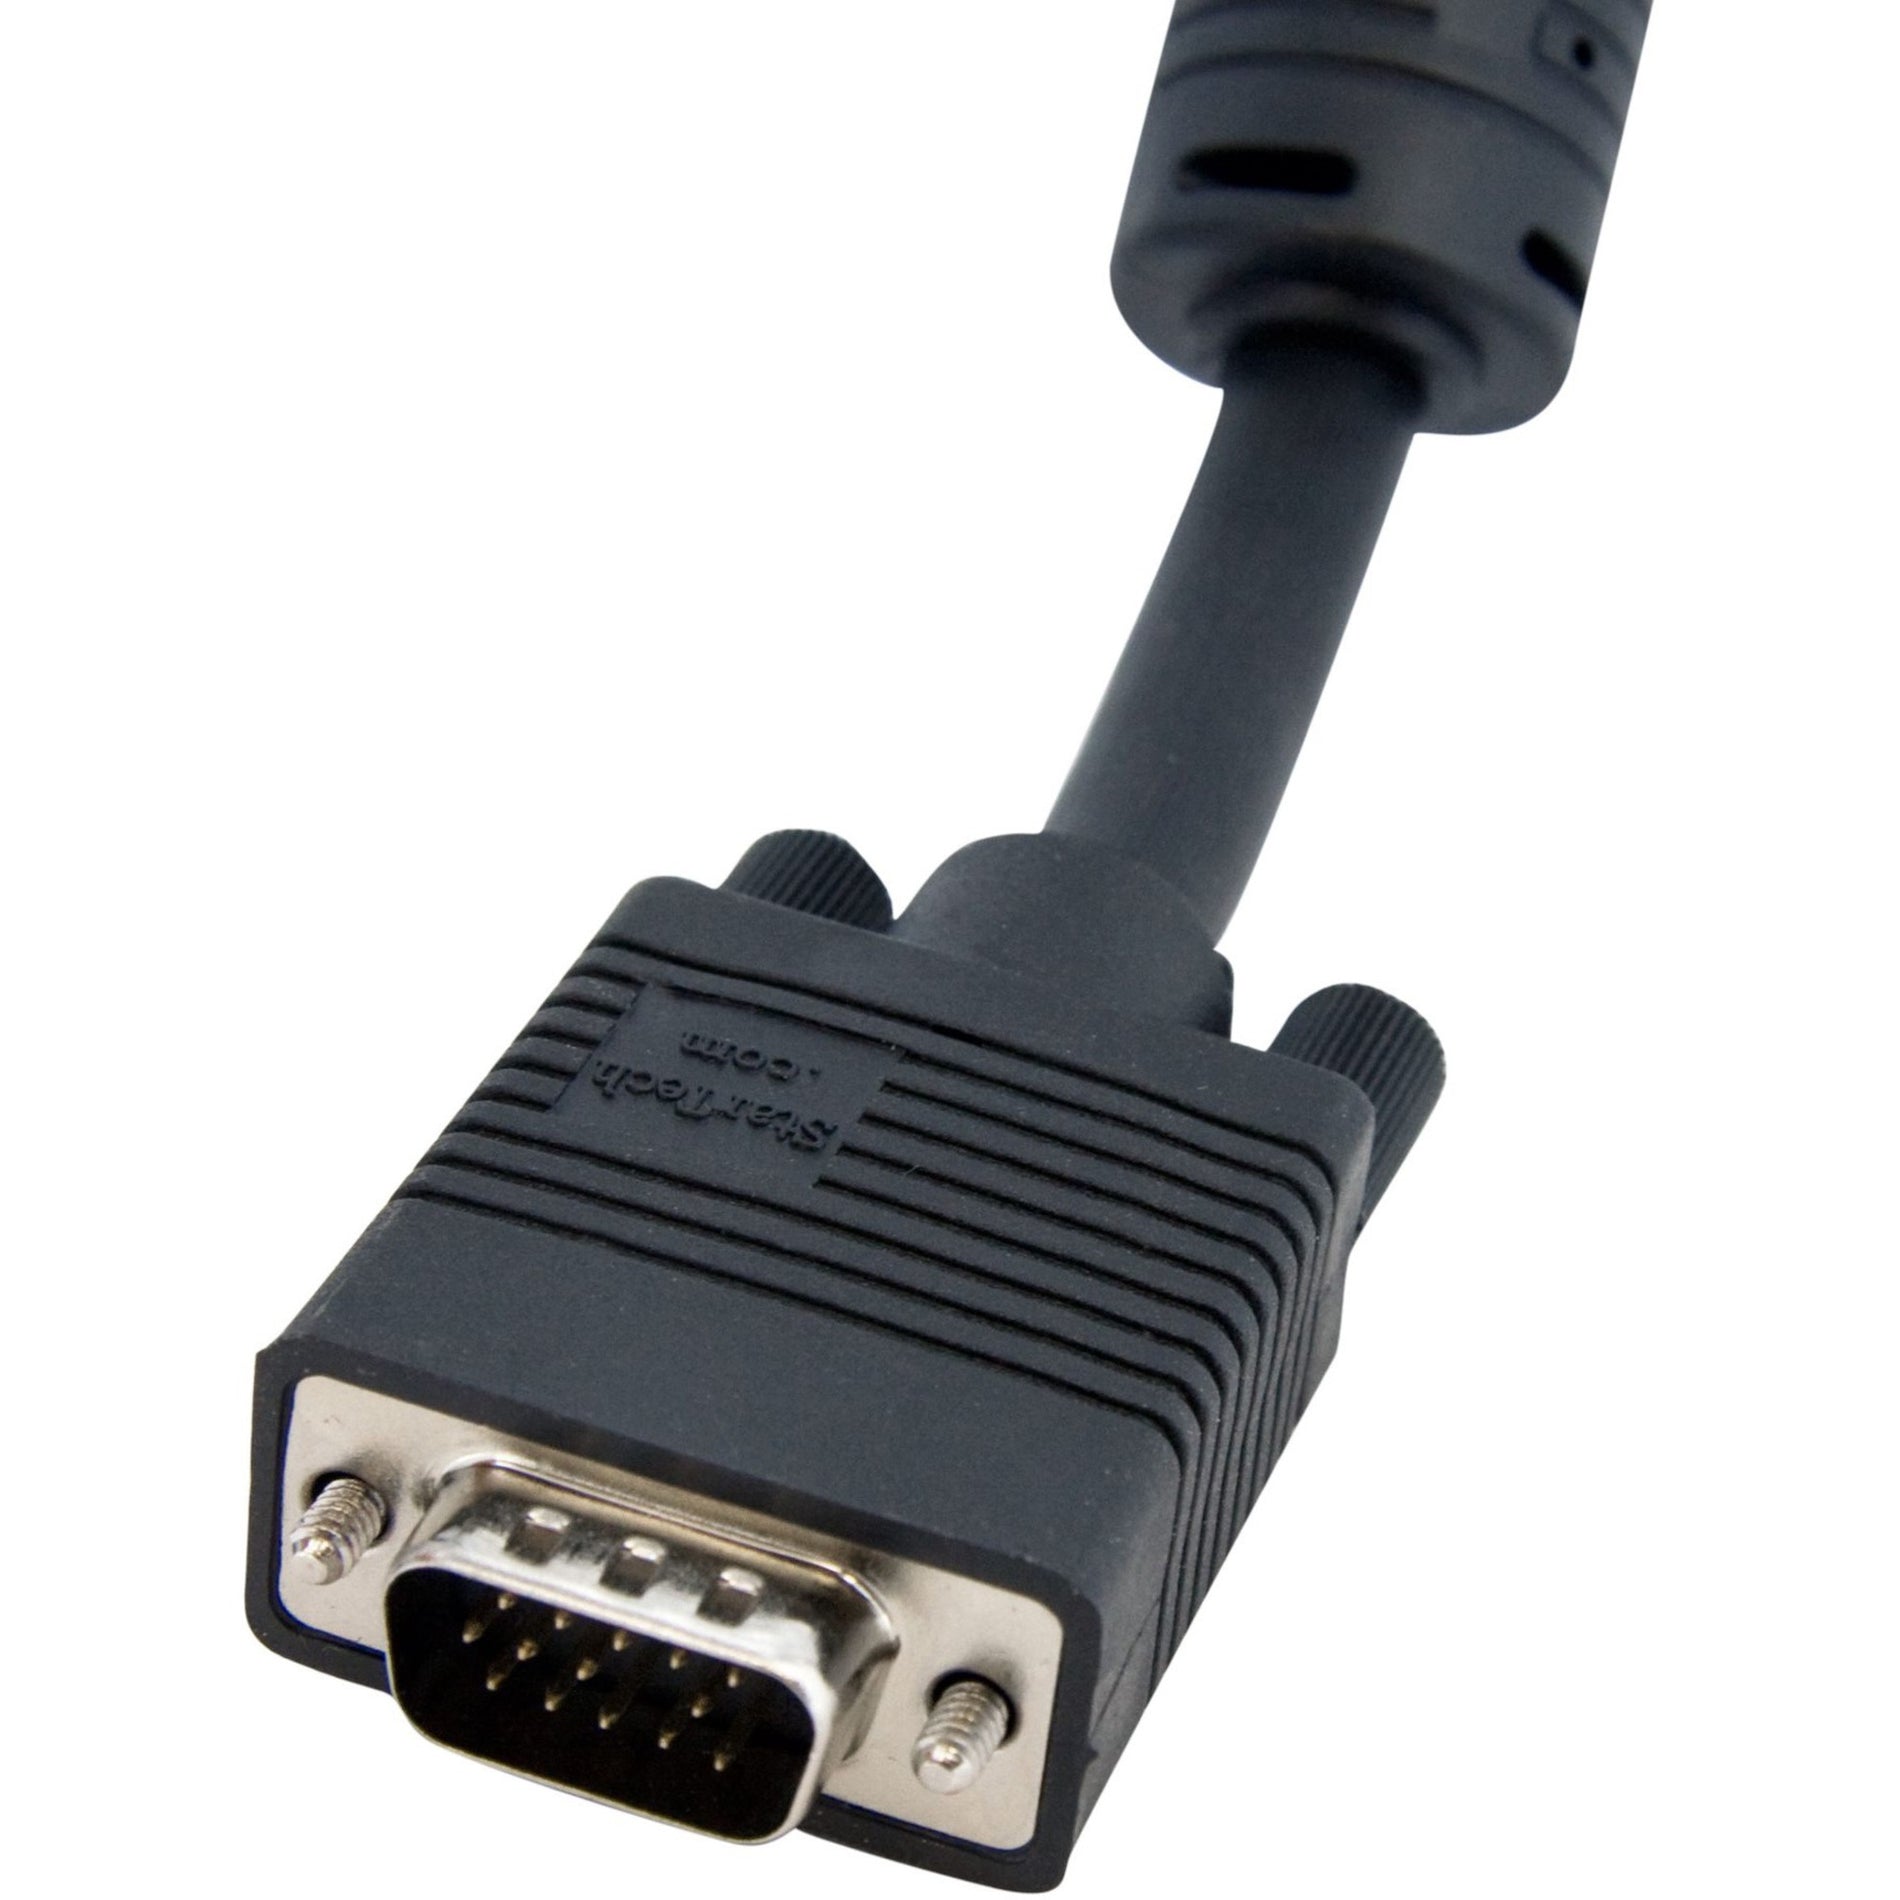 StarTech.com MXT101HQ Coax High ResVGA Monitor Extension Cable - 6 ft, Crystal Clear Display